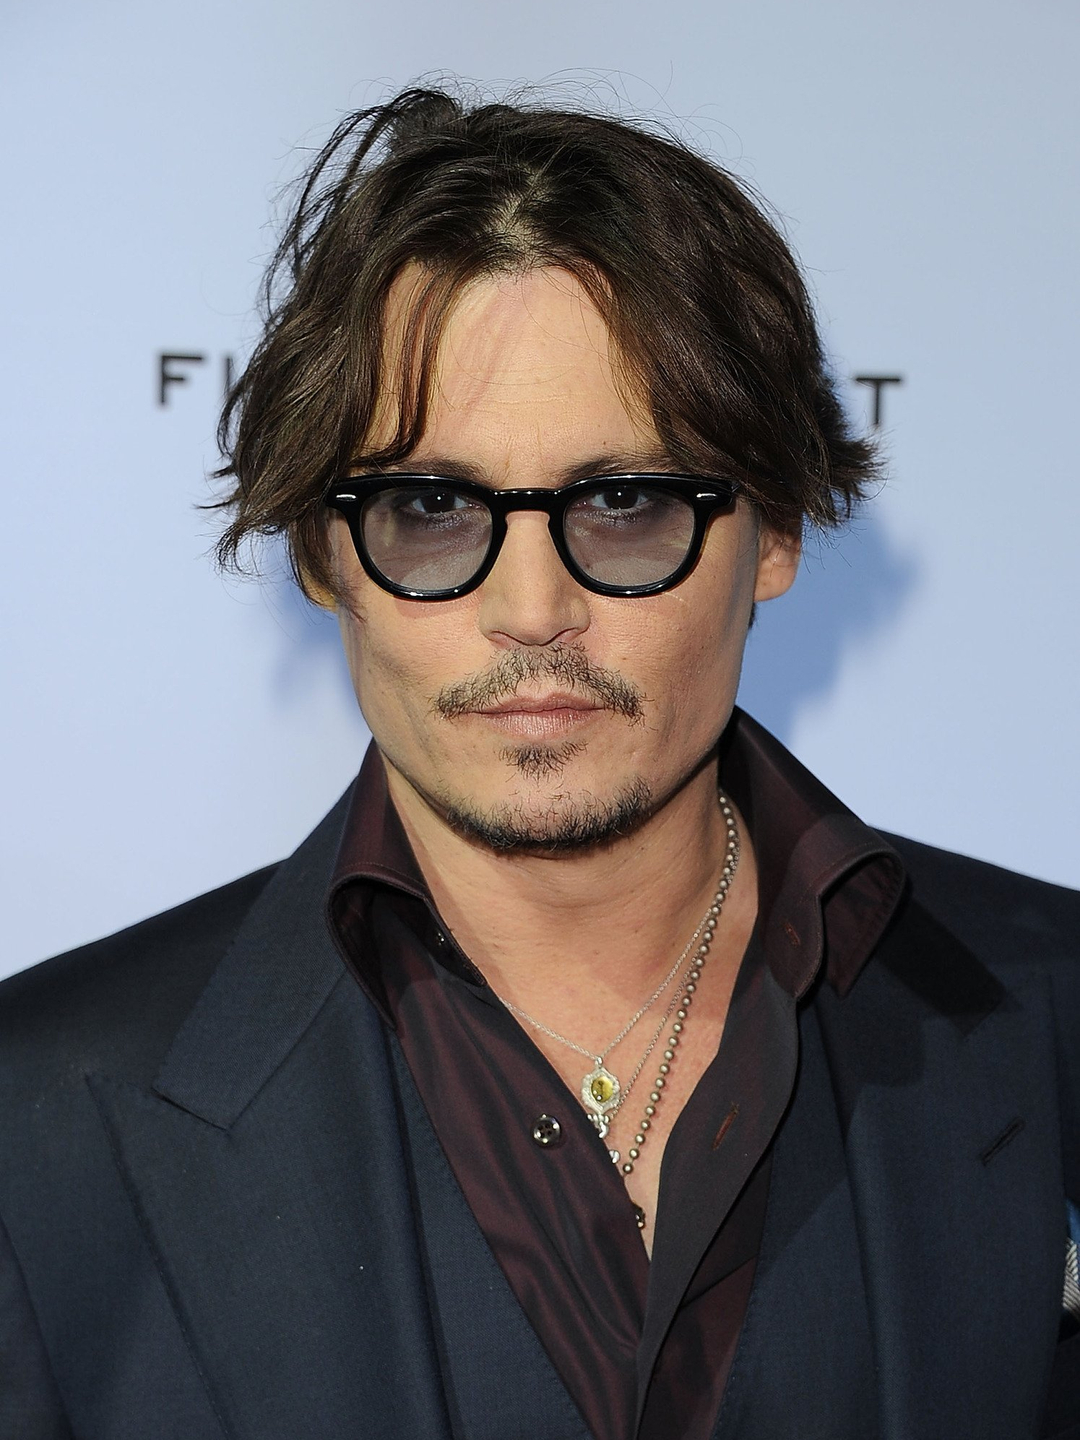 Johnny Depp who is his mother